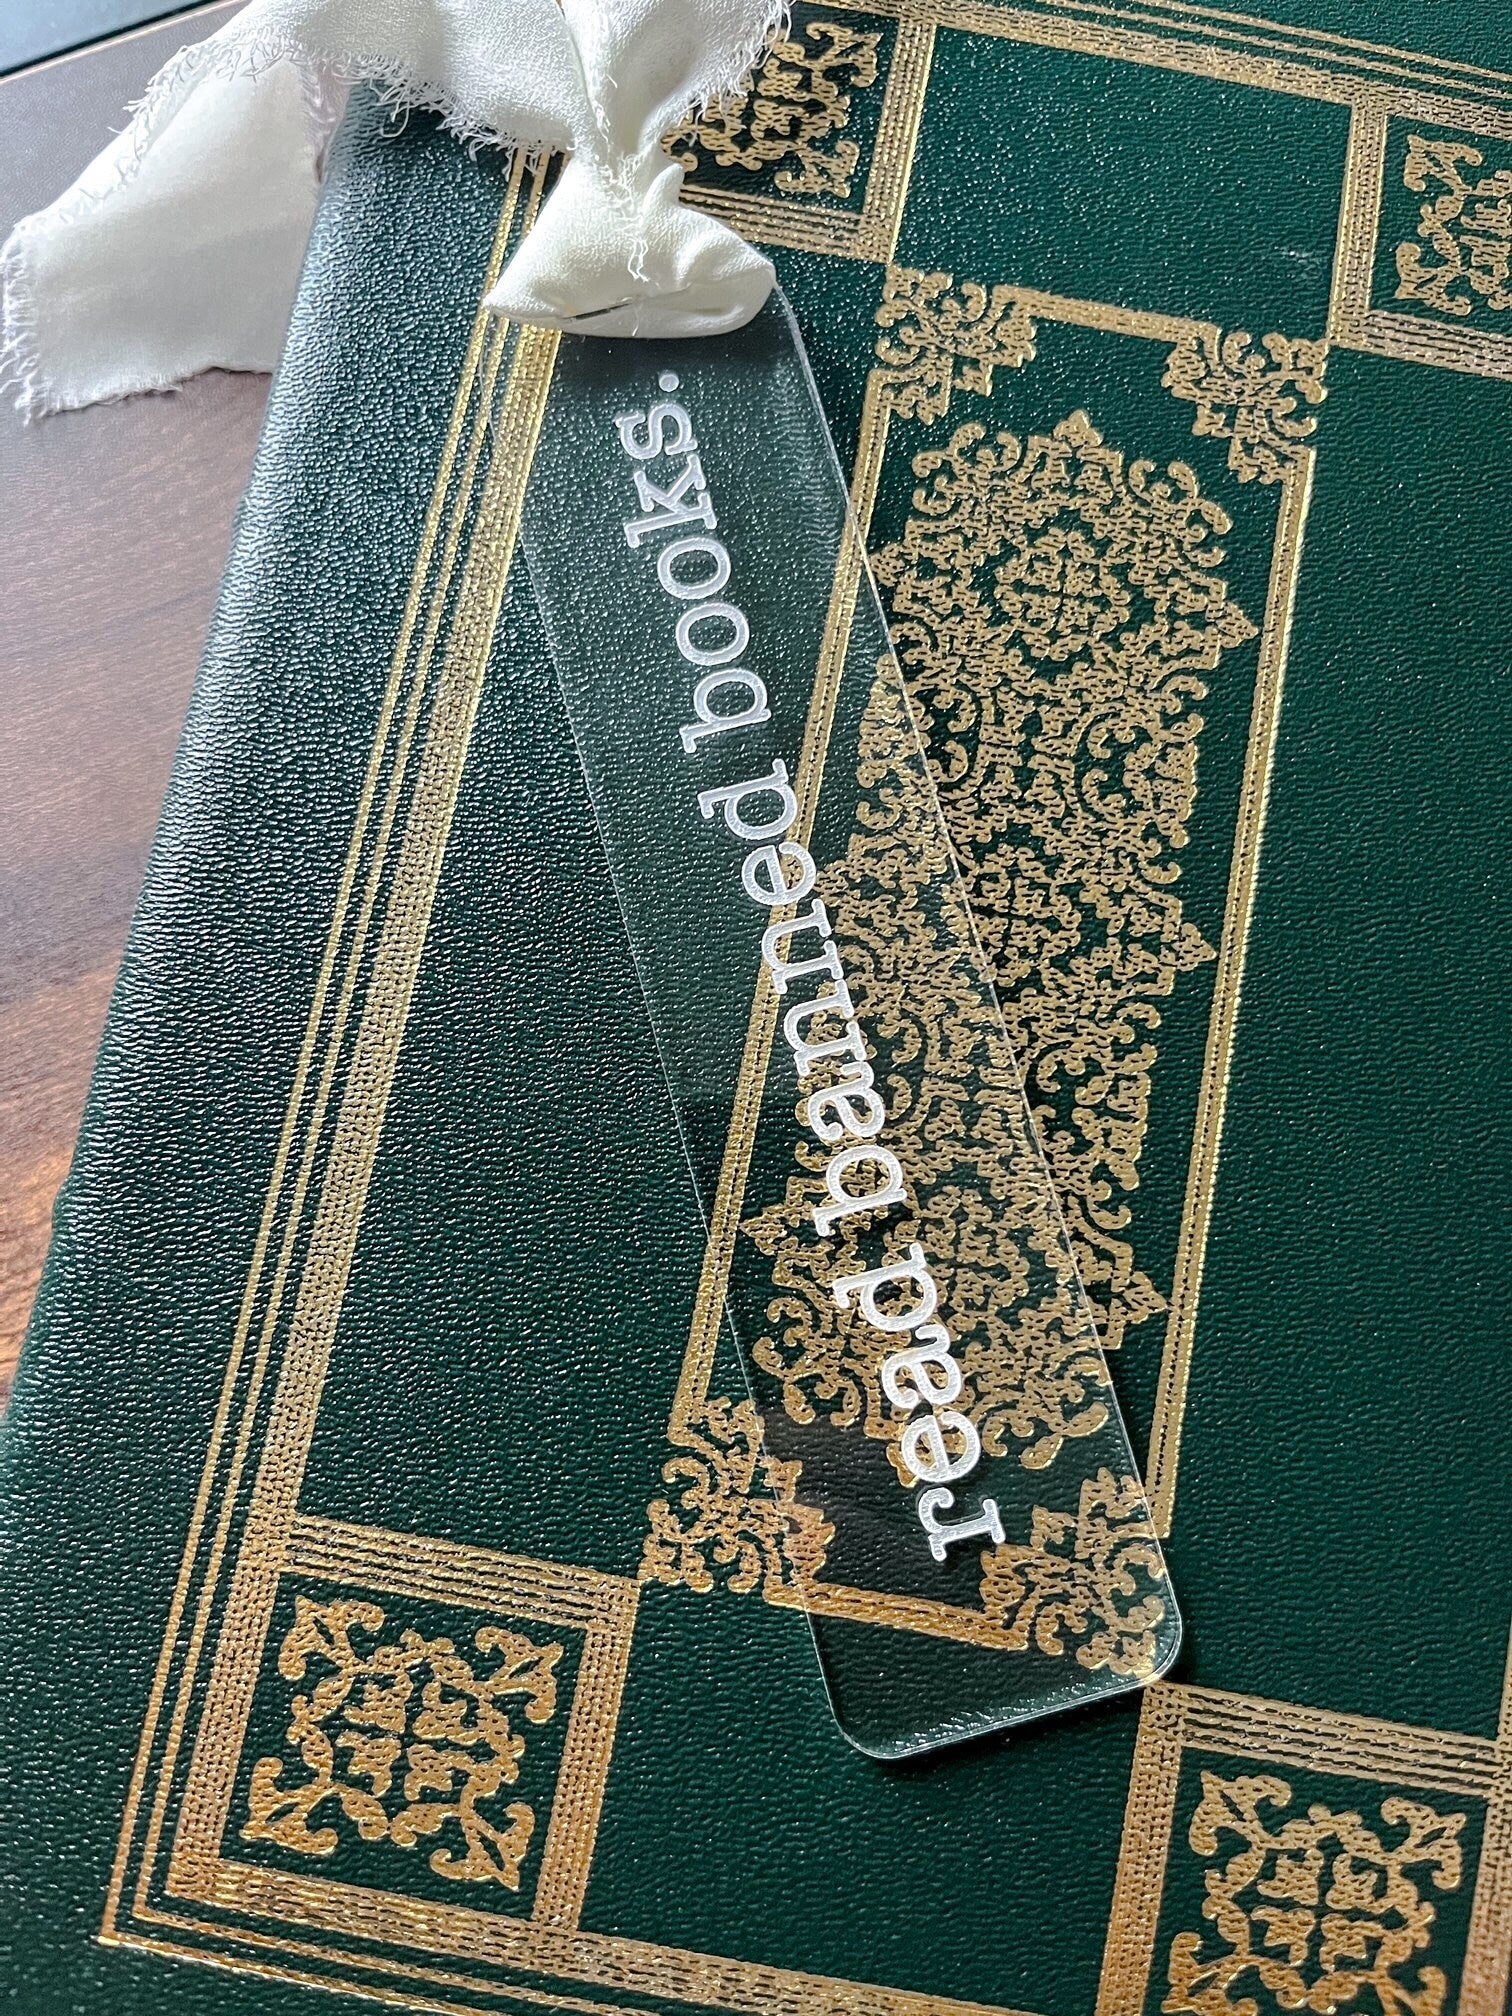 Read Banned Books Acrylic Bookmark, Line Drawing for Book Lover, Funny Bookmark Gift, Laser Engraved Wood Bookmark